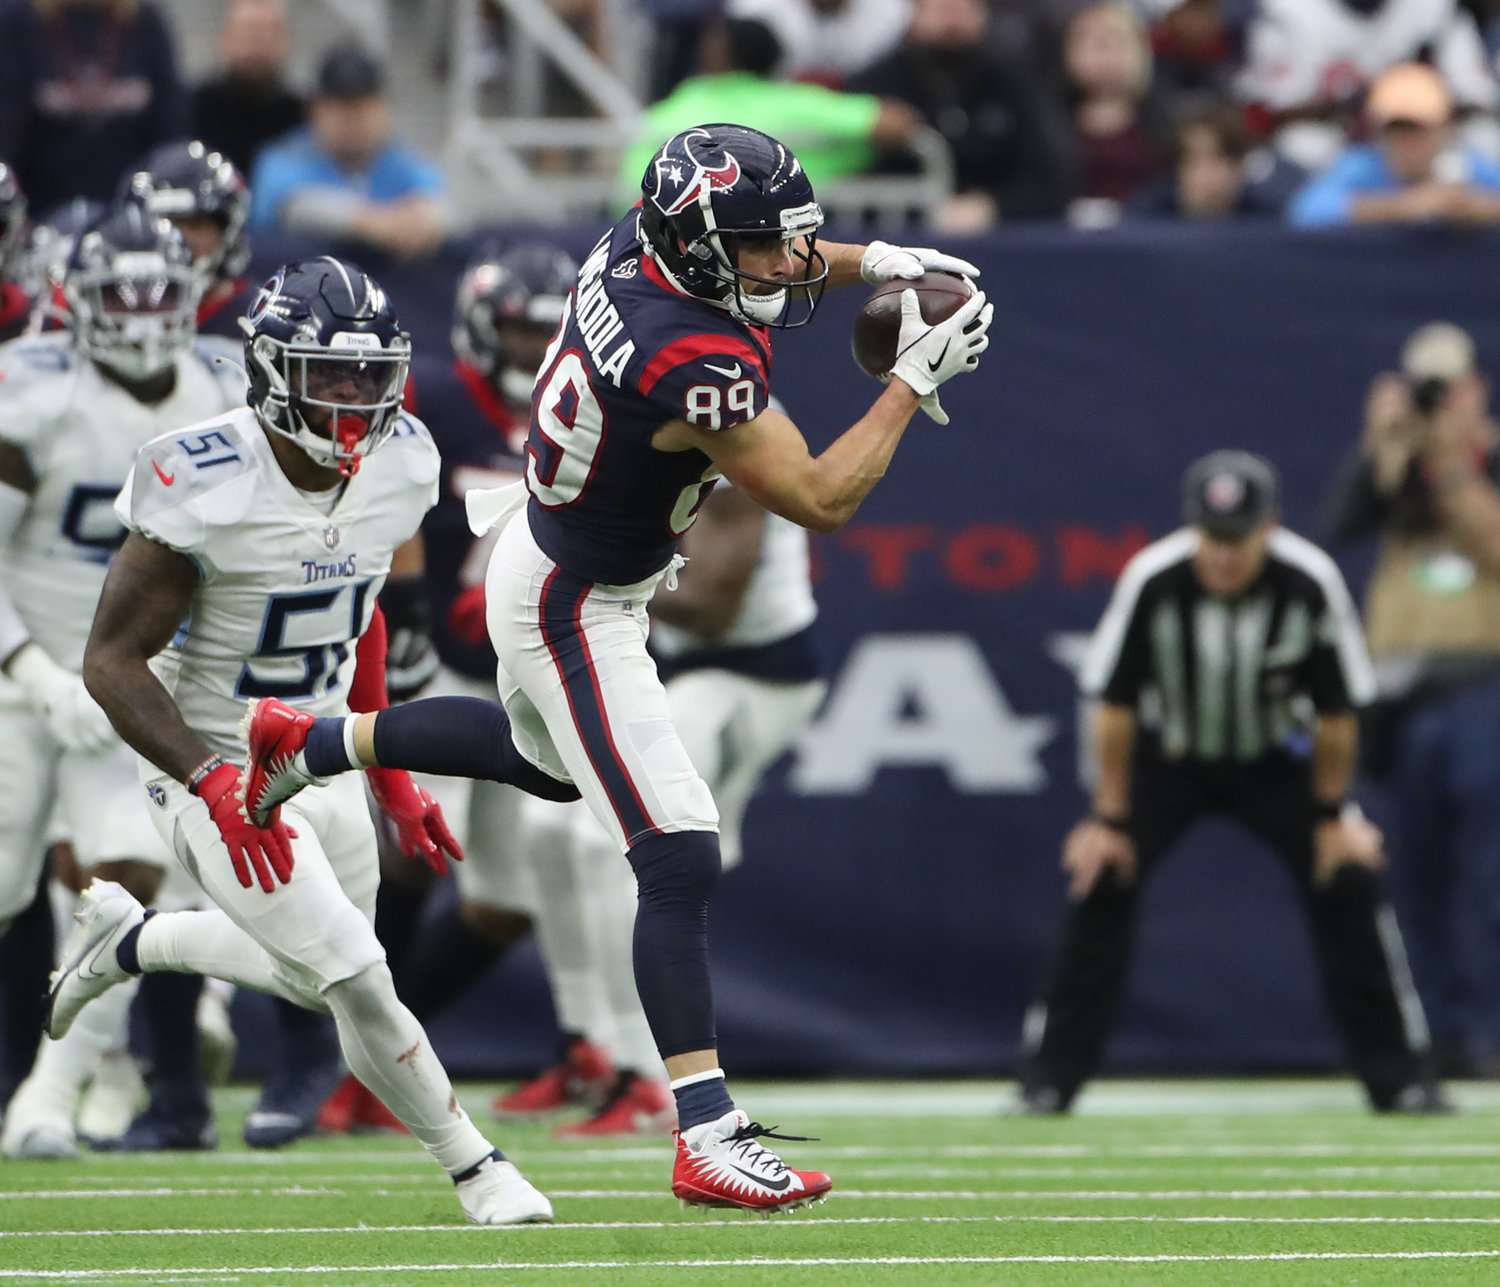 Houston Texans wide receiver Danny Amendola (89) makes a catch during an NFL game between the Texans and the Titans on Jan. 9, 2022 in Houston, Texas. The Titans won, 28-25.